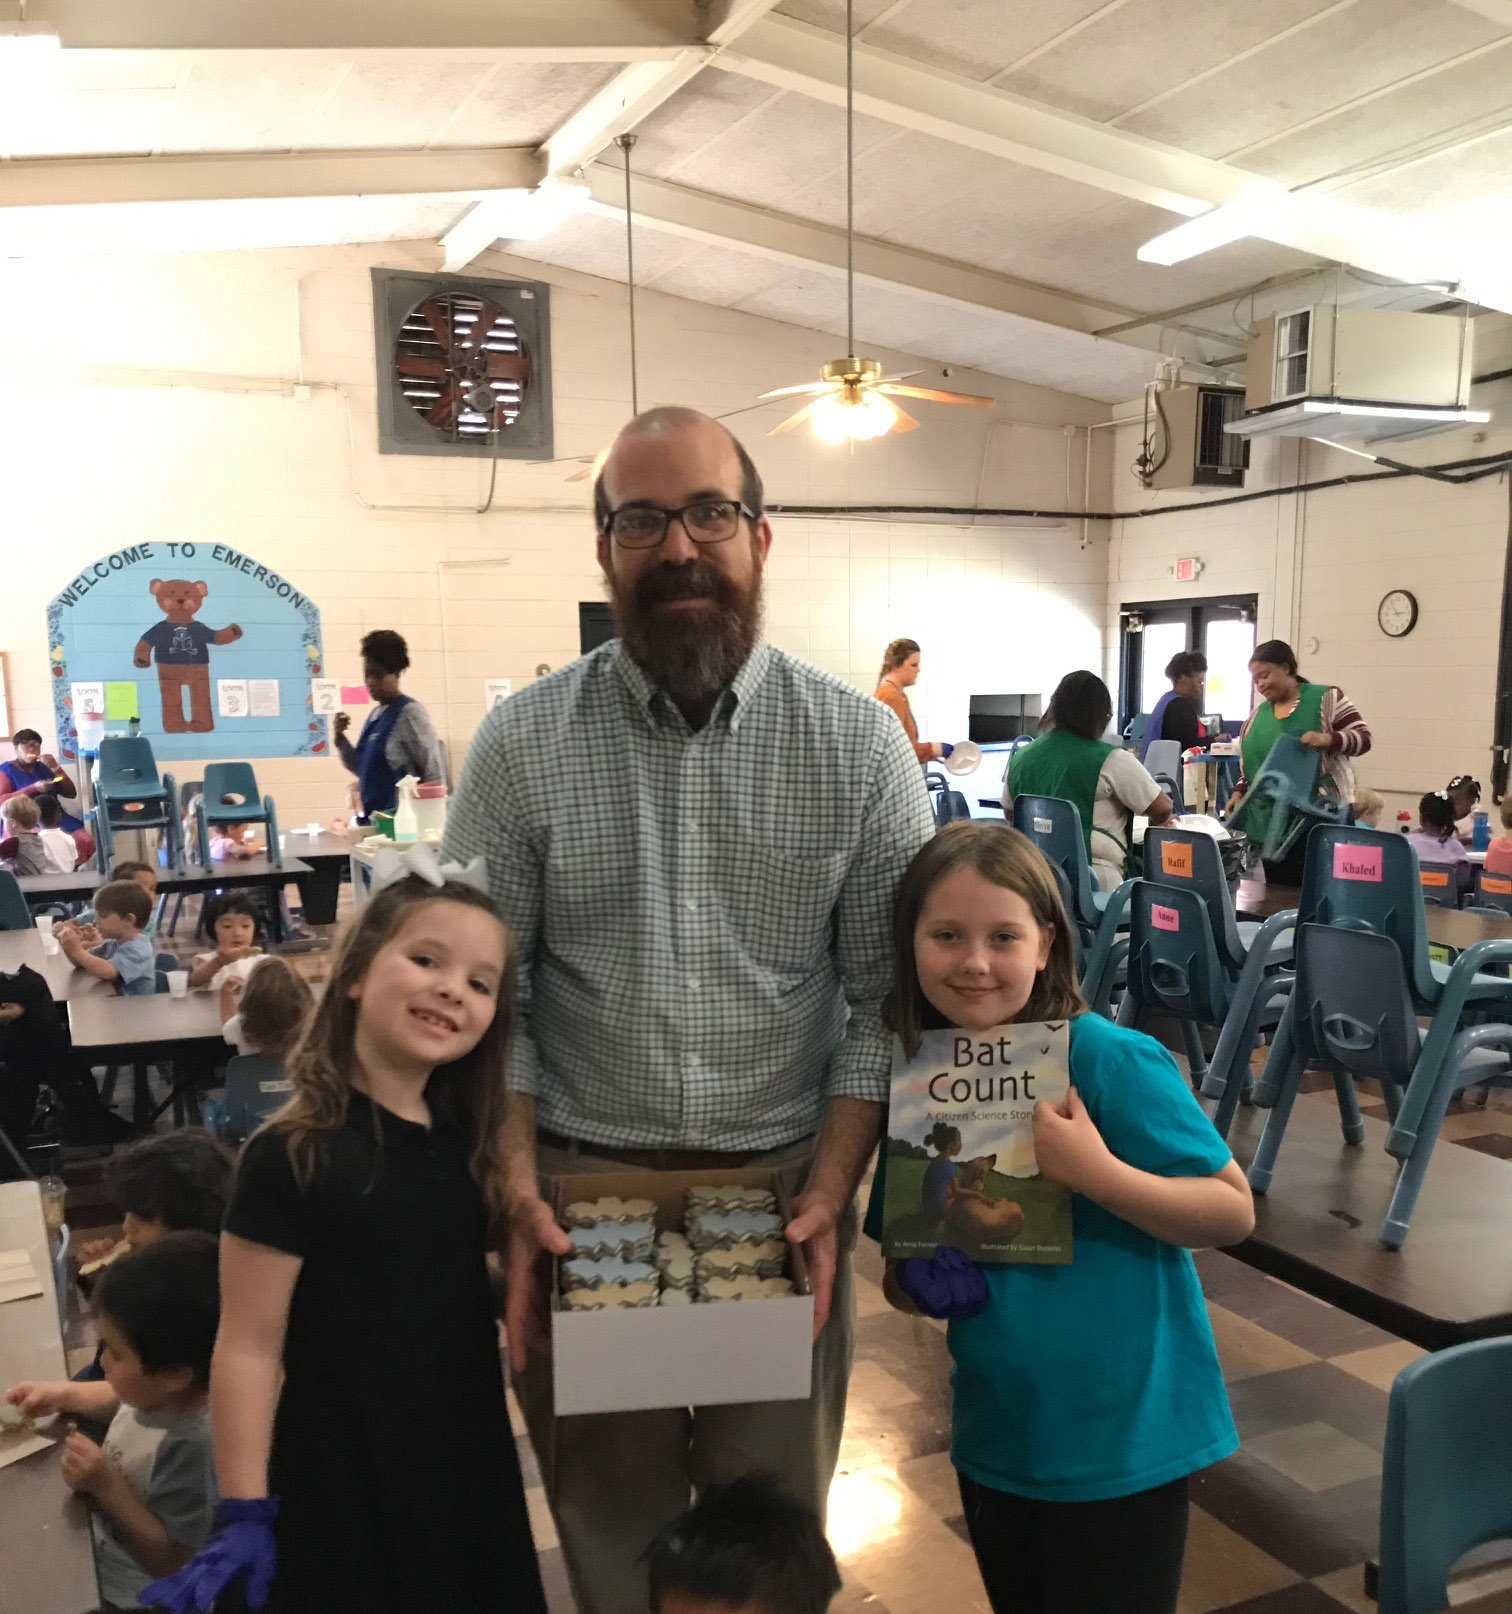 Dr. Ryan Walker, MSU Department of Curriculum, Instruction, and Special Education, is assisted by Mary Mack Walker (left) and Margot Hoffman (right) in handing out bat cookies to Emerson Family School students, in celebration of the 2018 Giverny Award.